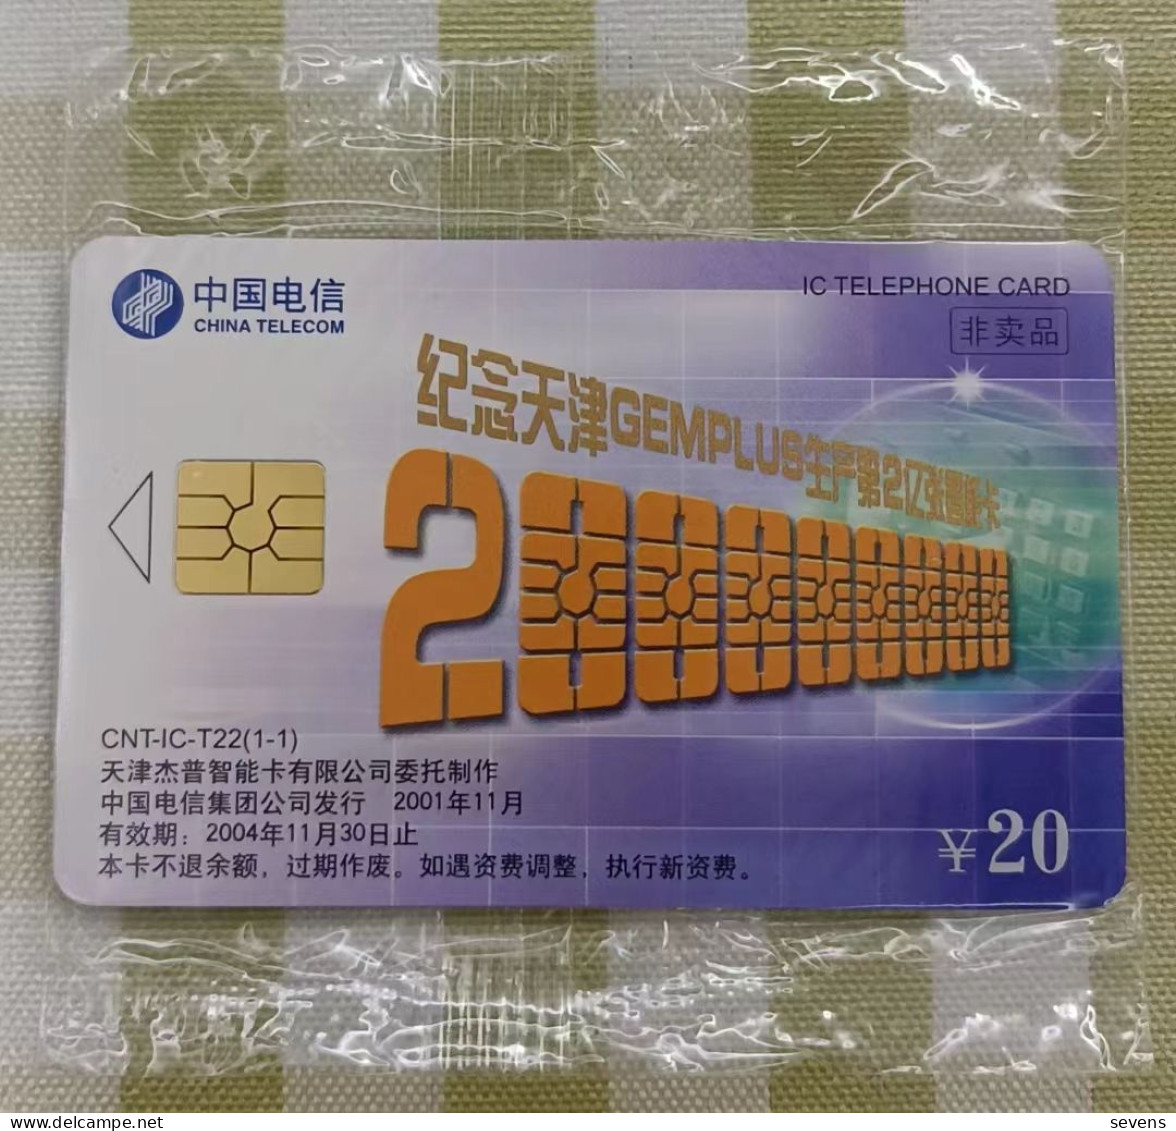 China Telecom Private Chip Phonecard,present To Customers By Gemplus, 200000000 Pieces Of Chip Card, See Description - China